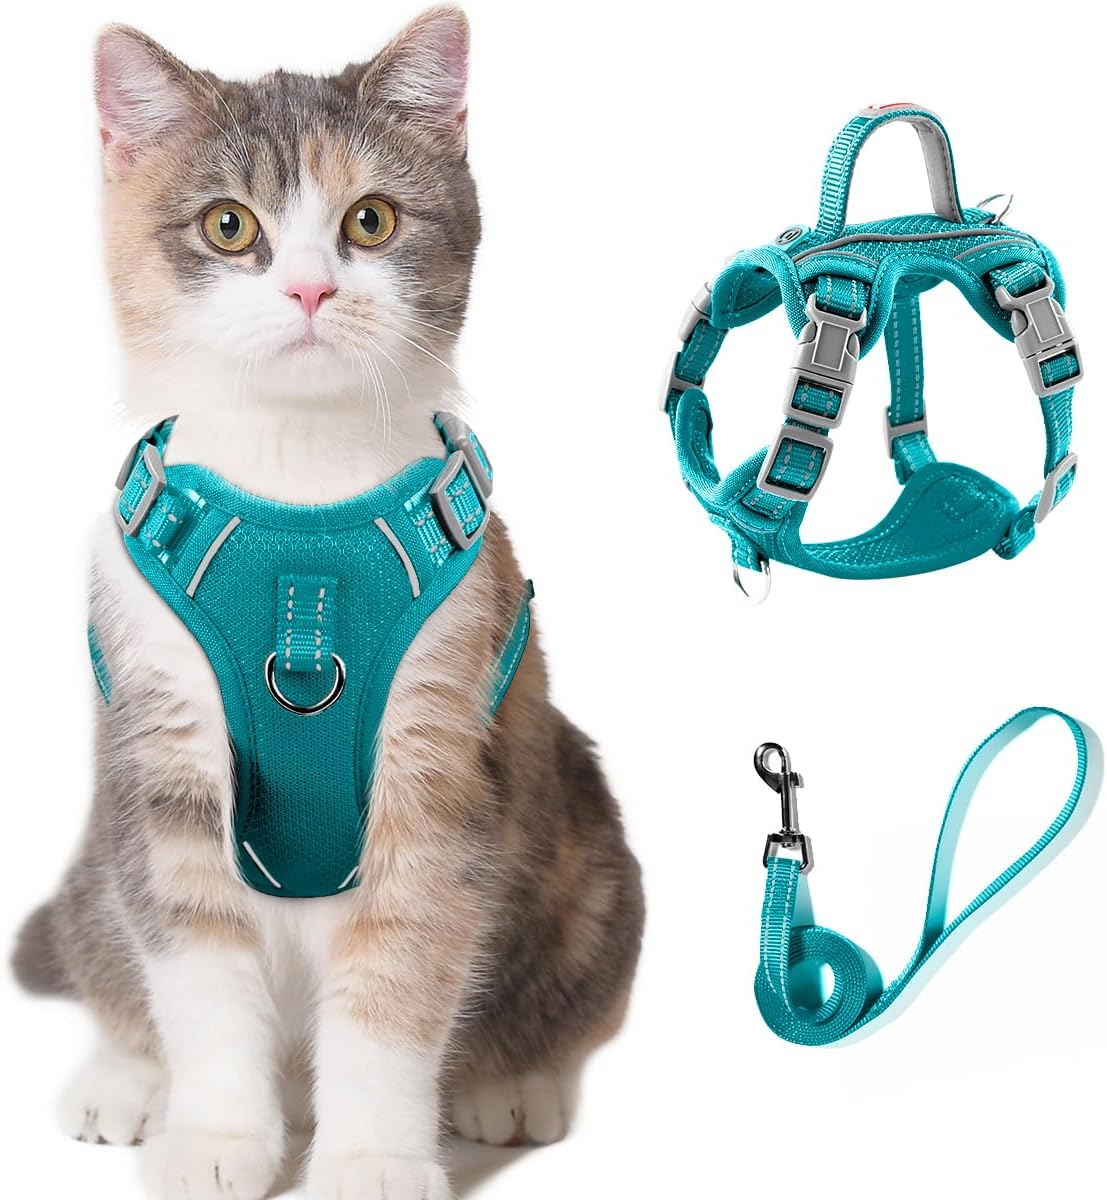 Cat Harness and Leash Set for Walking Escape Proof for Small Large cat Kitten